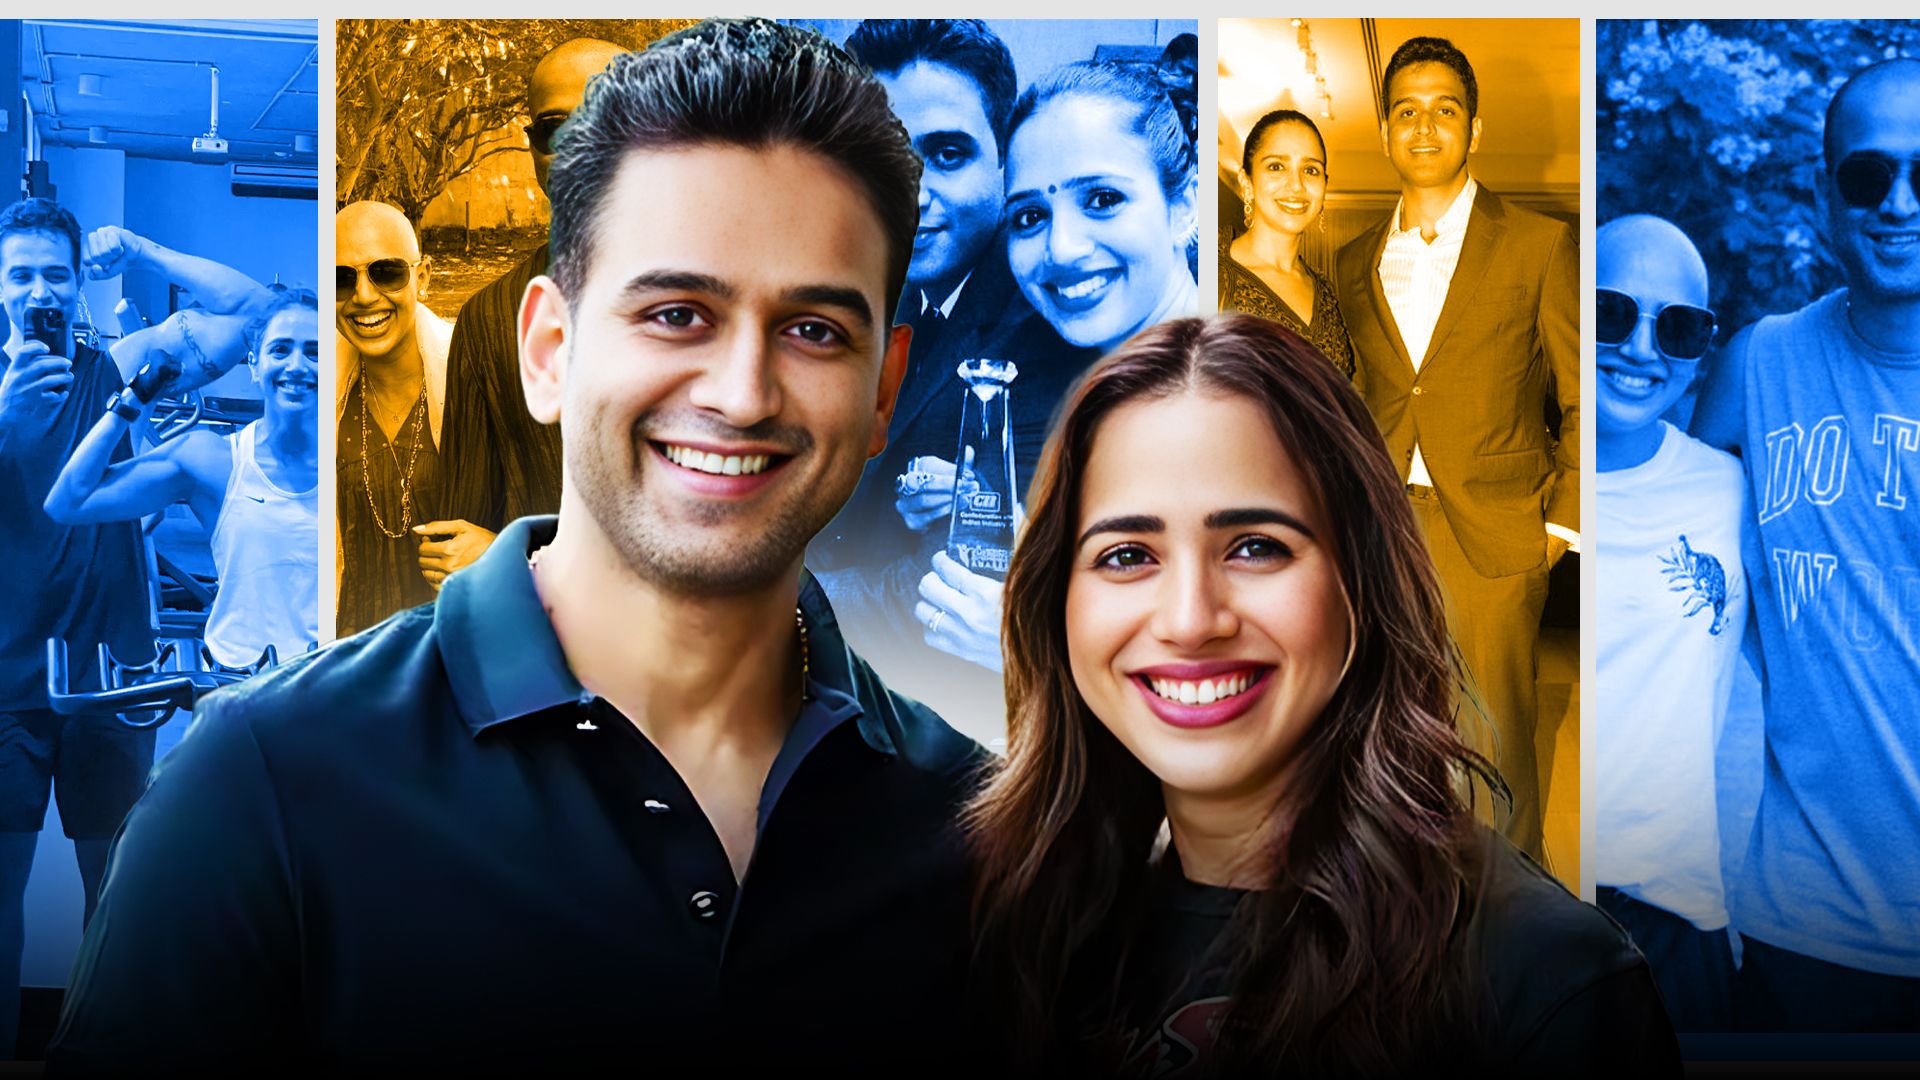 The Big C: How Seema and Nithin navigated the emotional rollercoaster